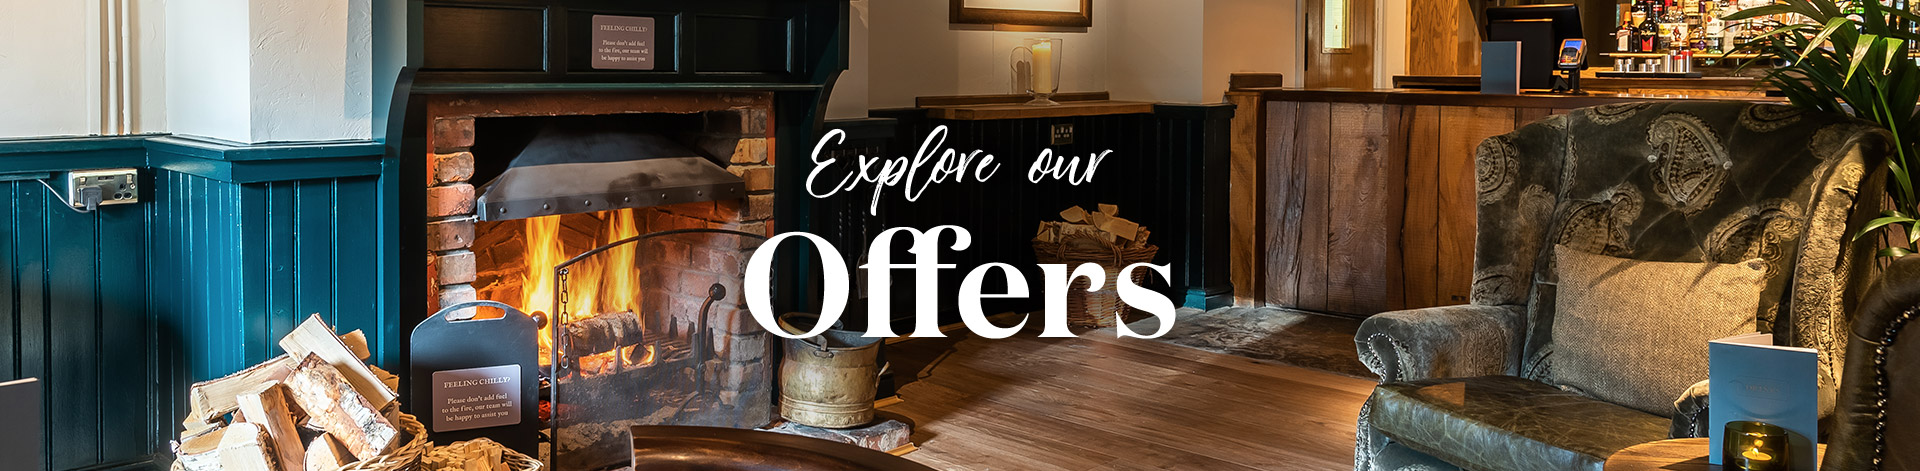 Our latest offers at The Drum Inn